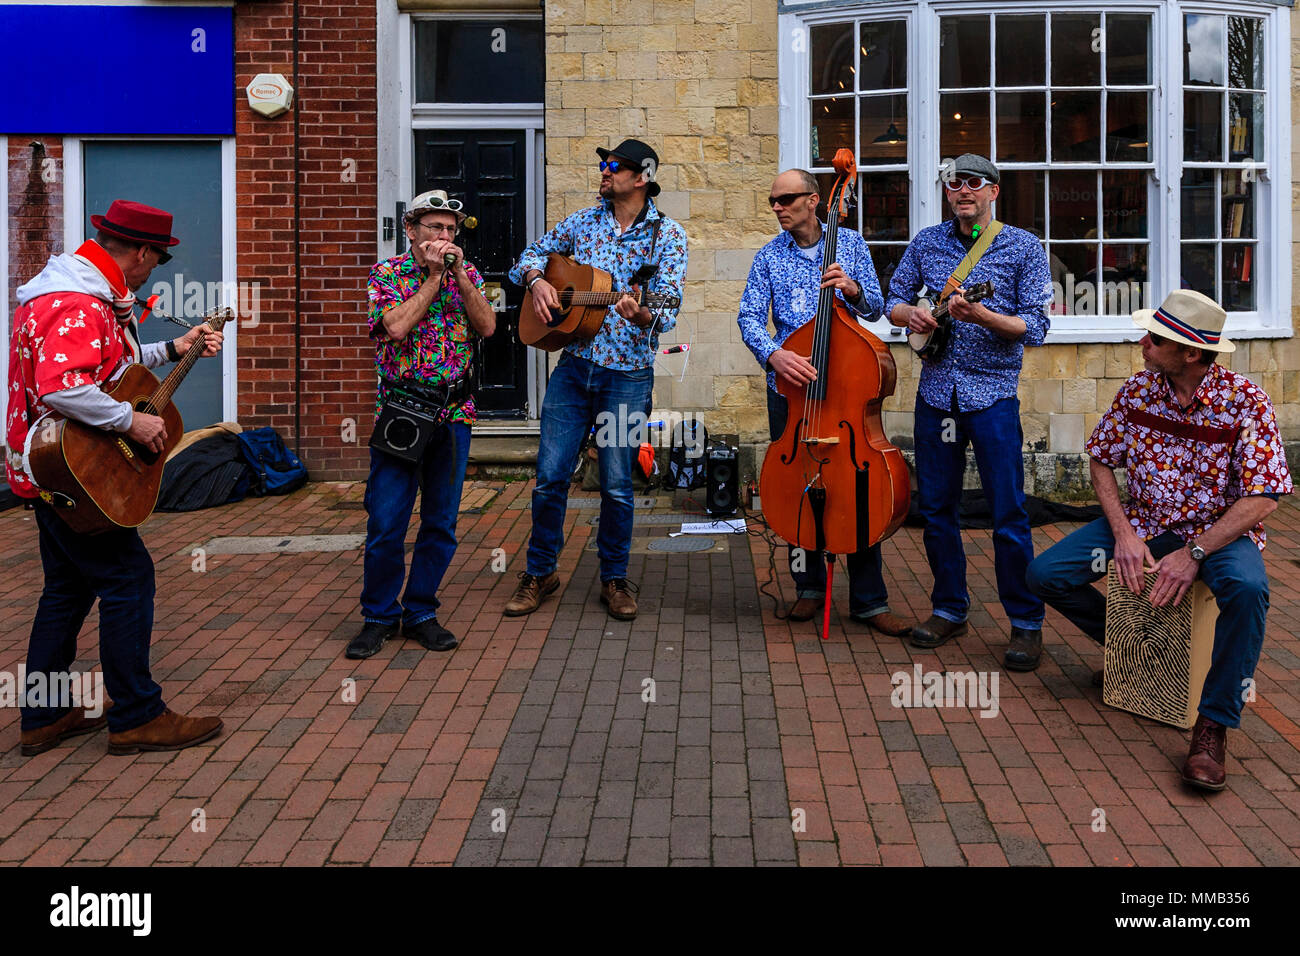 A Group Of Musicians Playing Music In The High Street, Lewes, Sussex, England Stock Photo